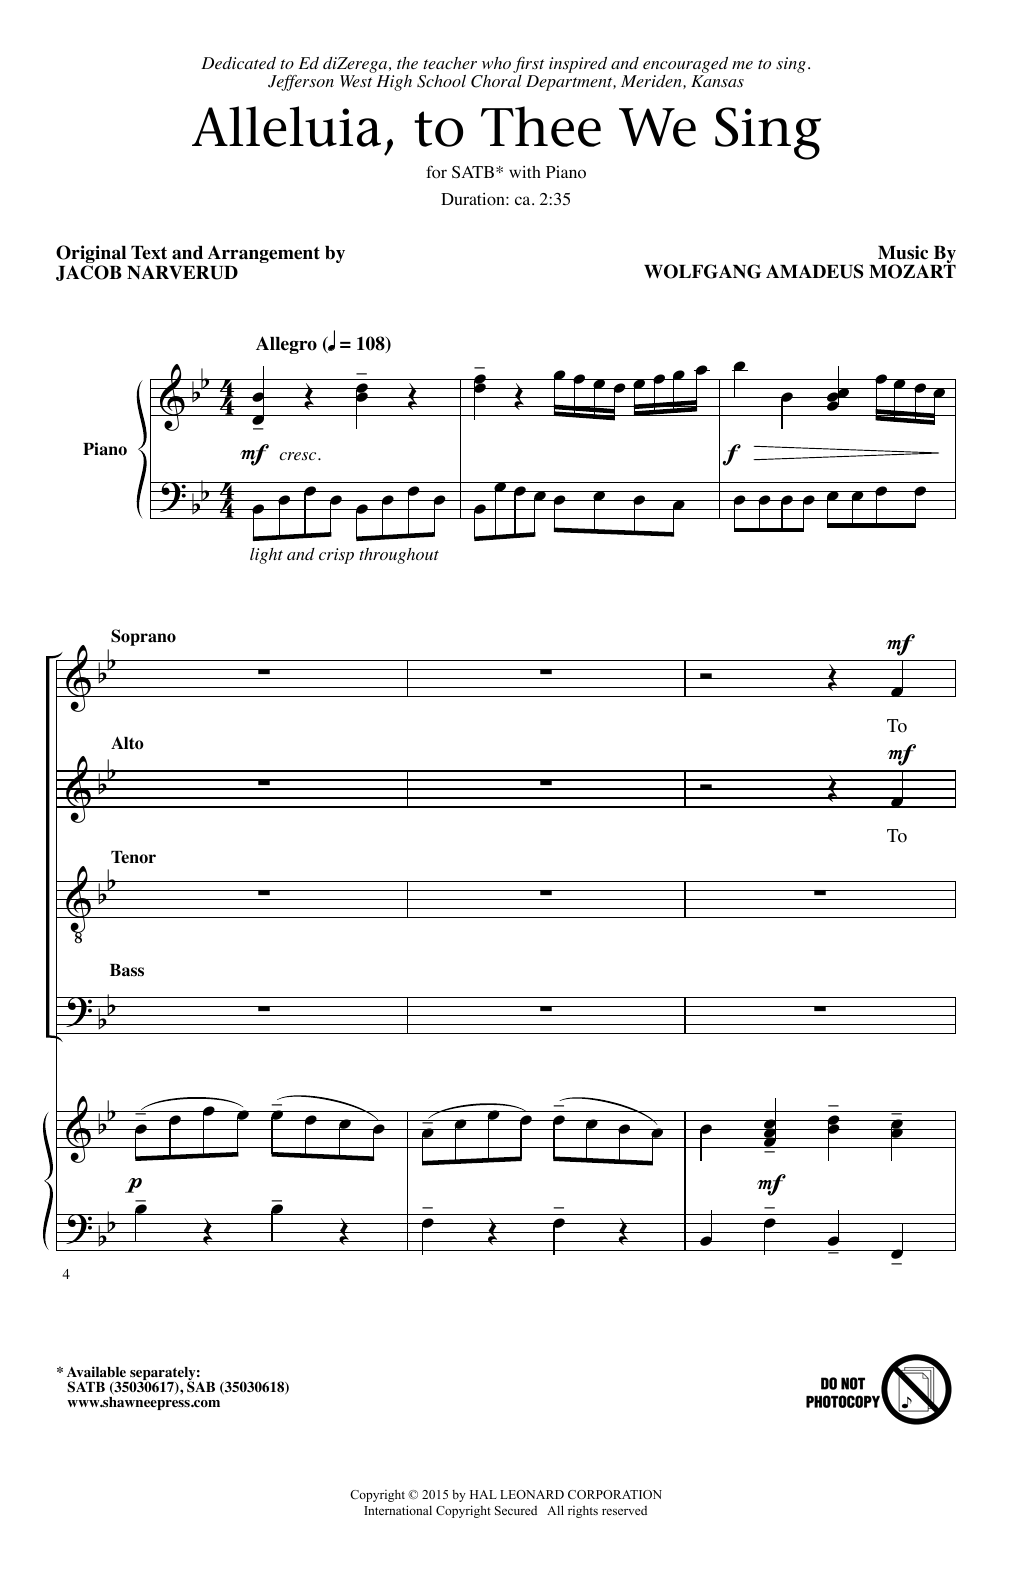 Wolfgang Amadeus Mozart Alleluia To Thee We Sing Arr Jacob Narverud Sheet Music Download 3443